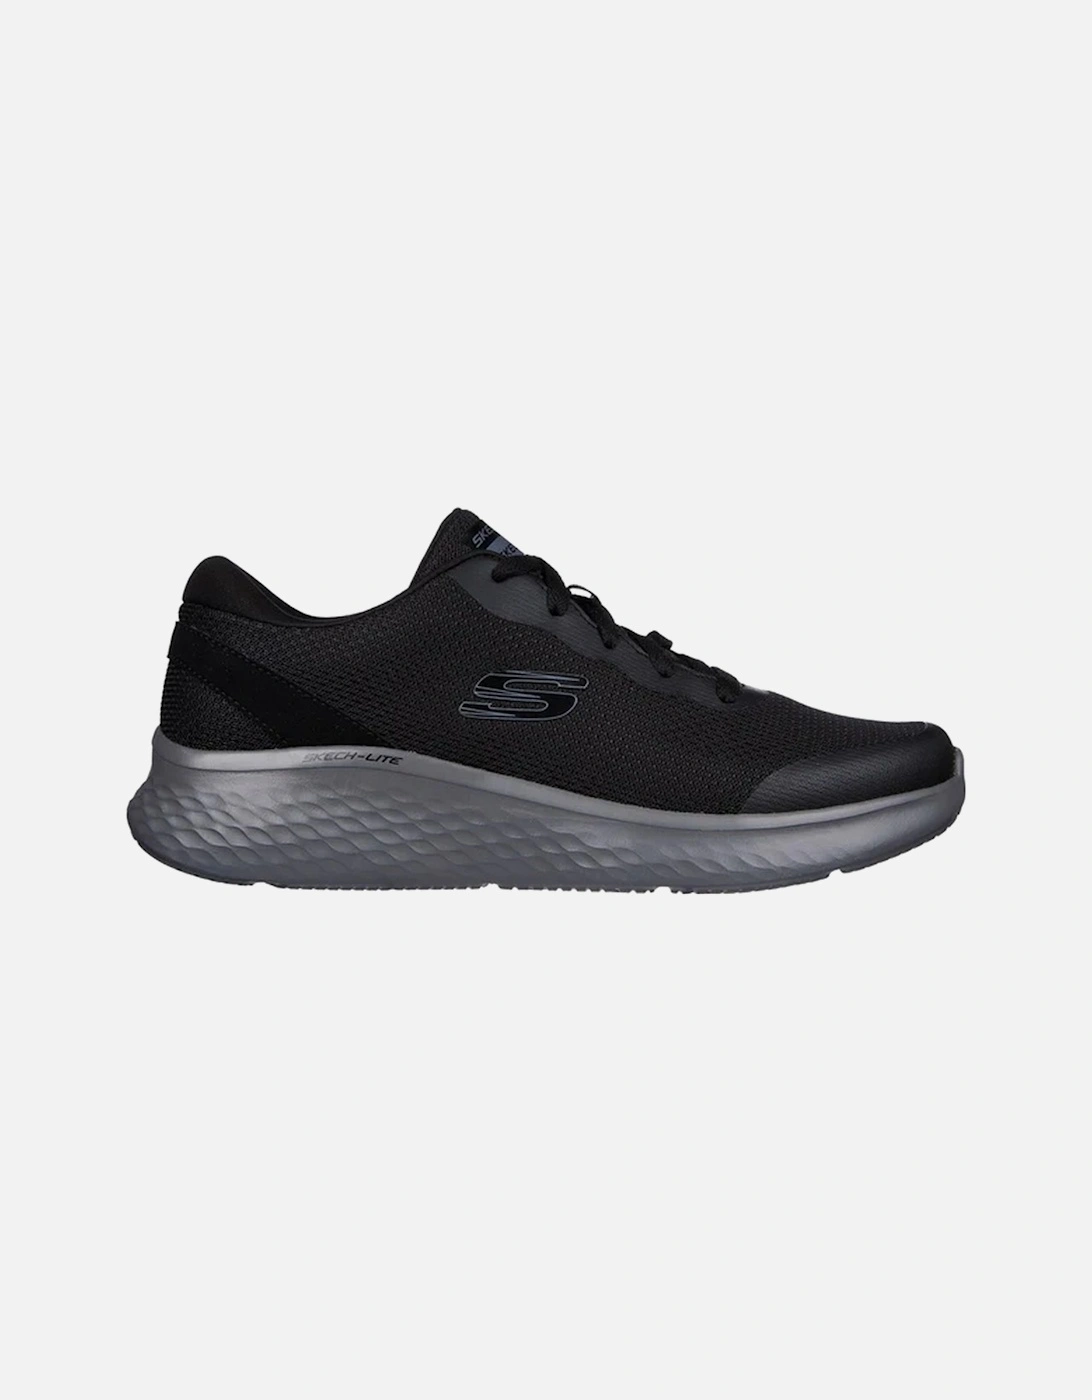 Mens Skech-Lite Pro Clear Rush Trainers